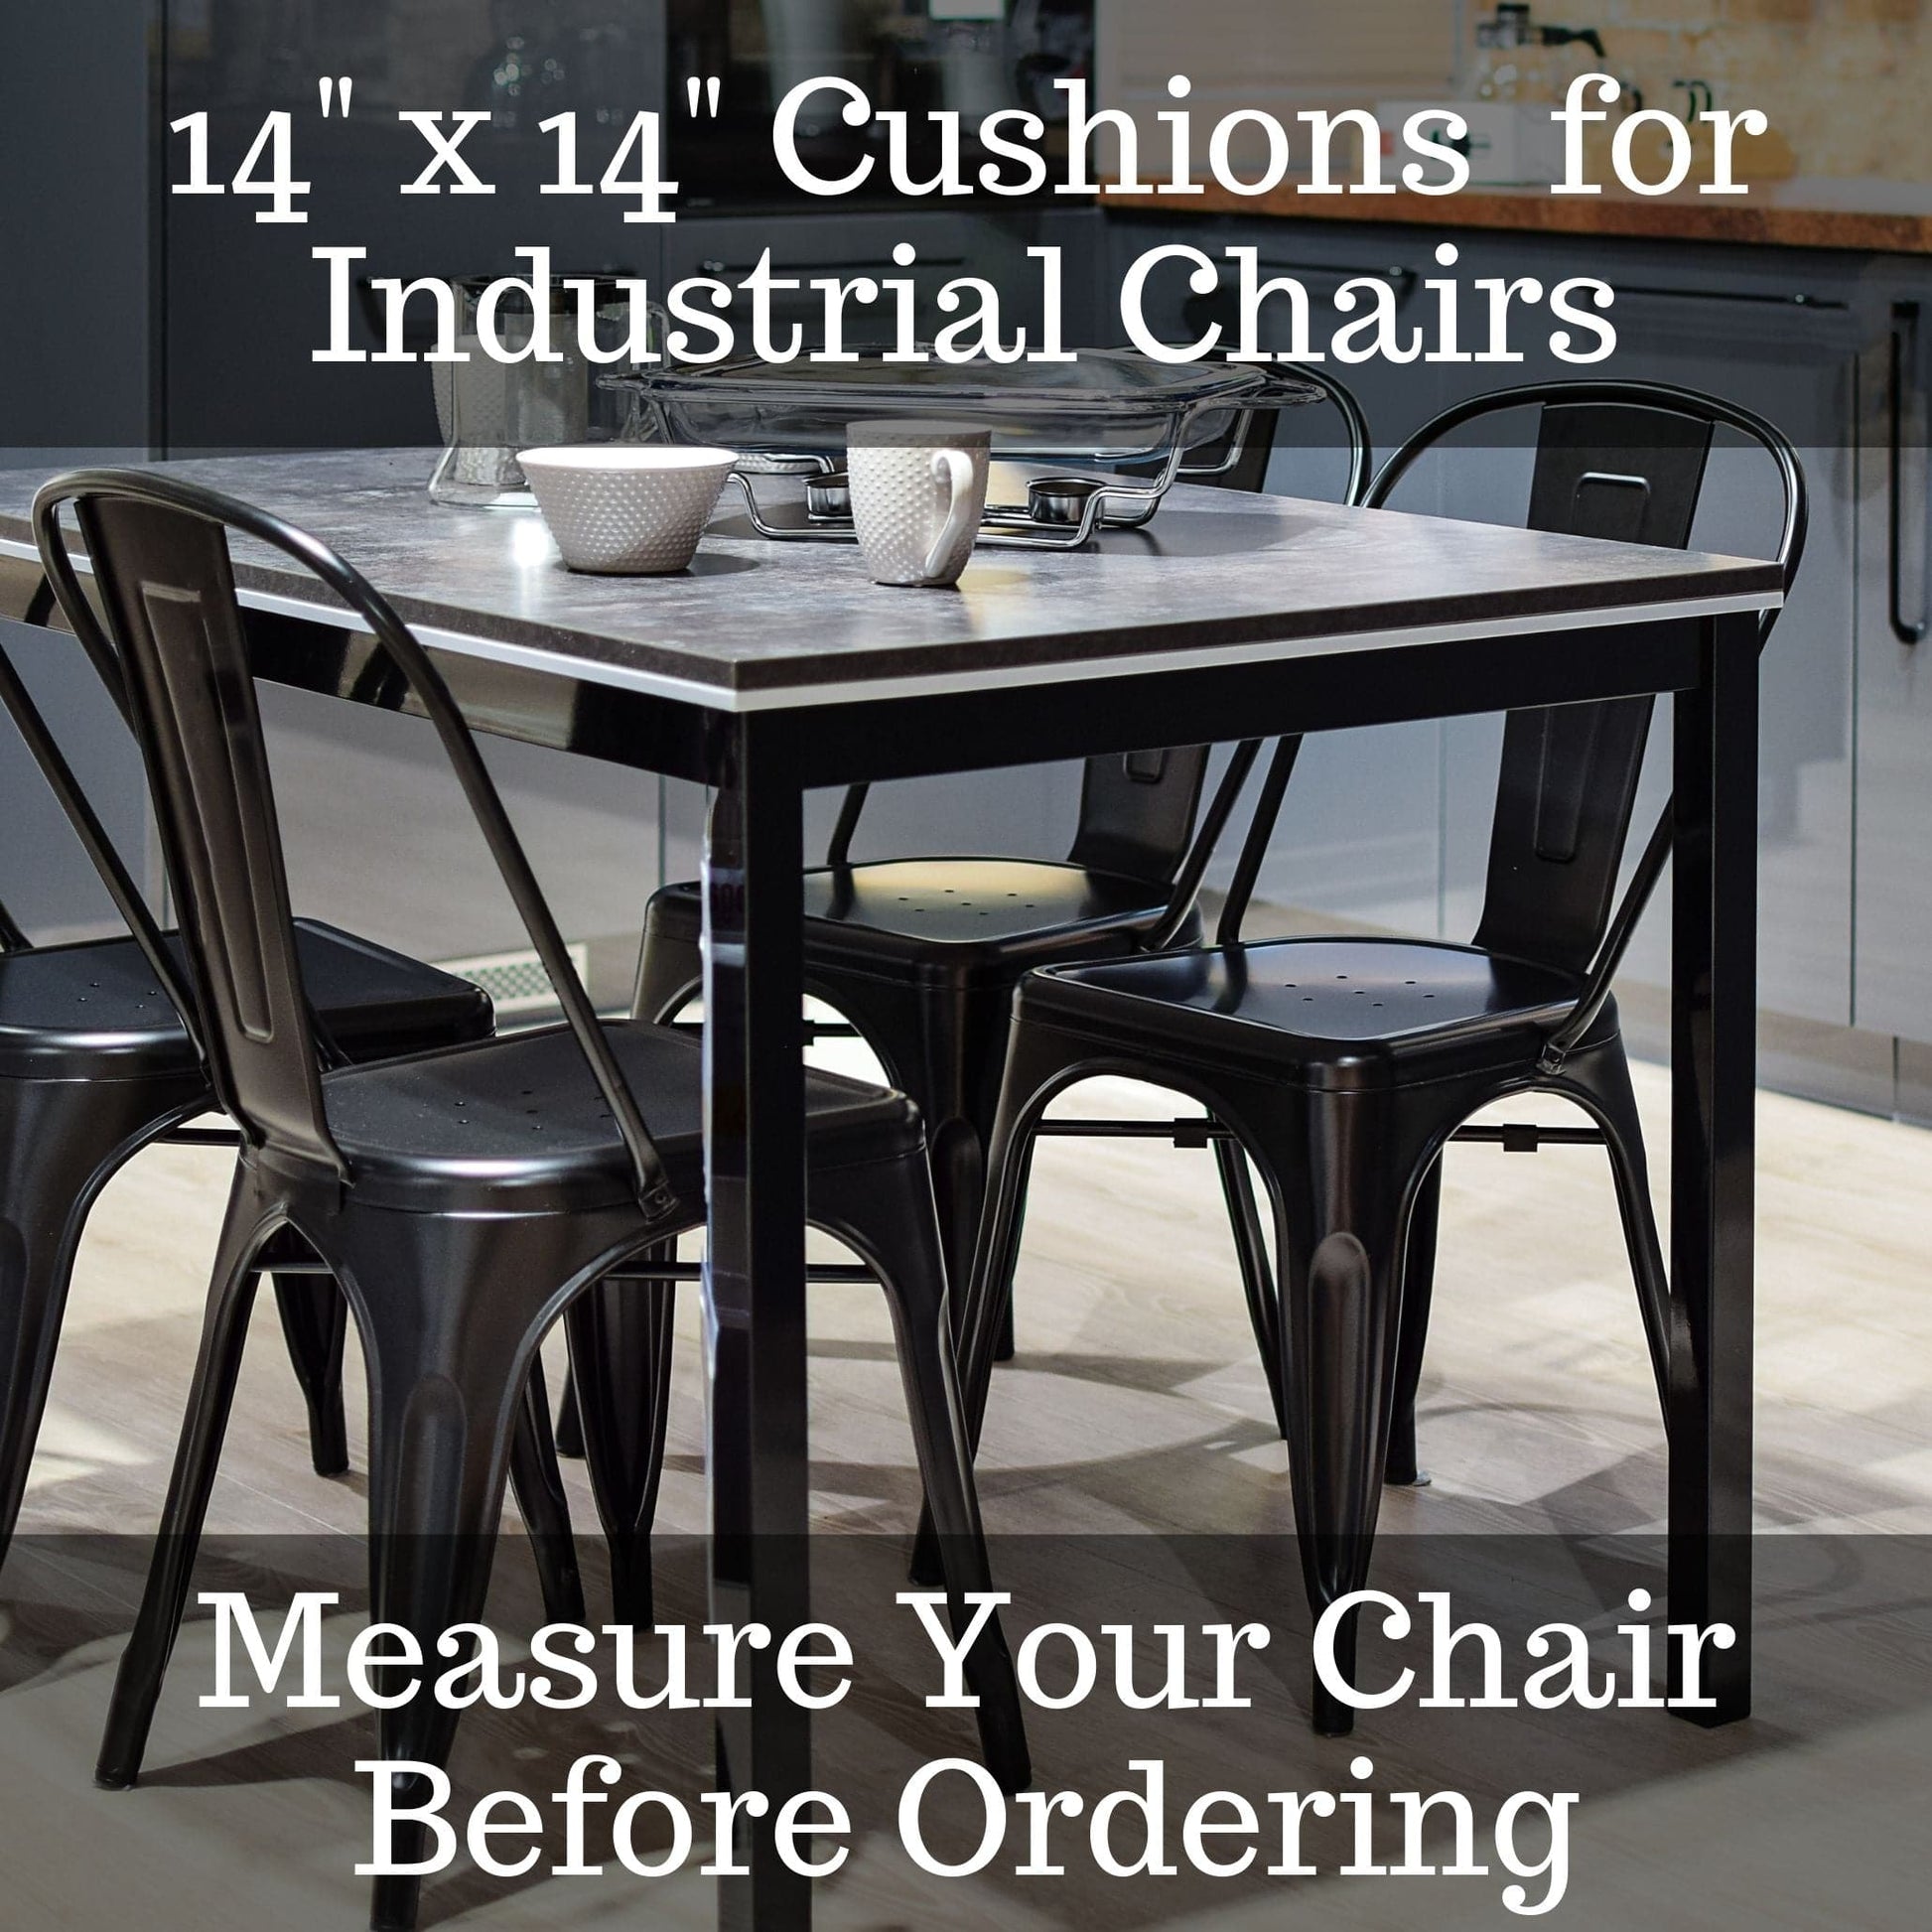 Measure Your Chair Card